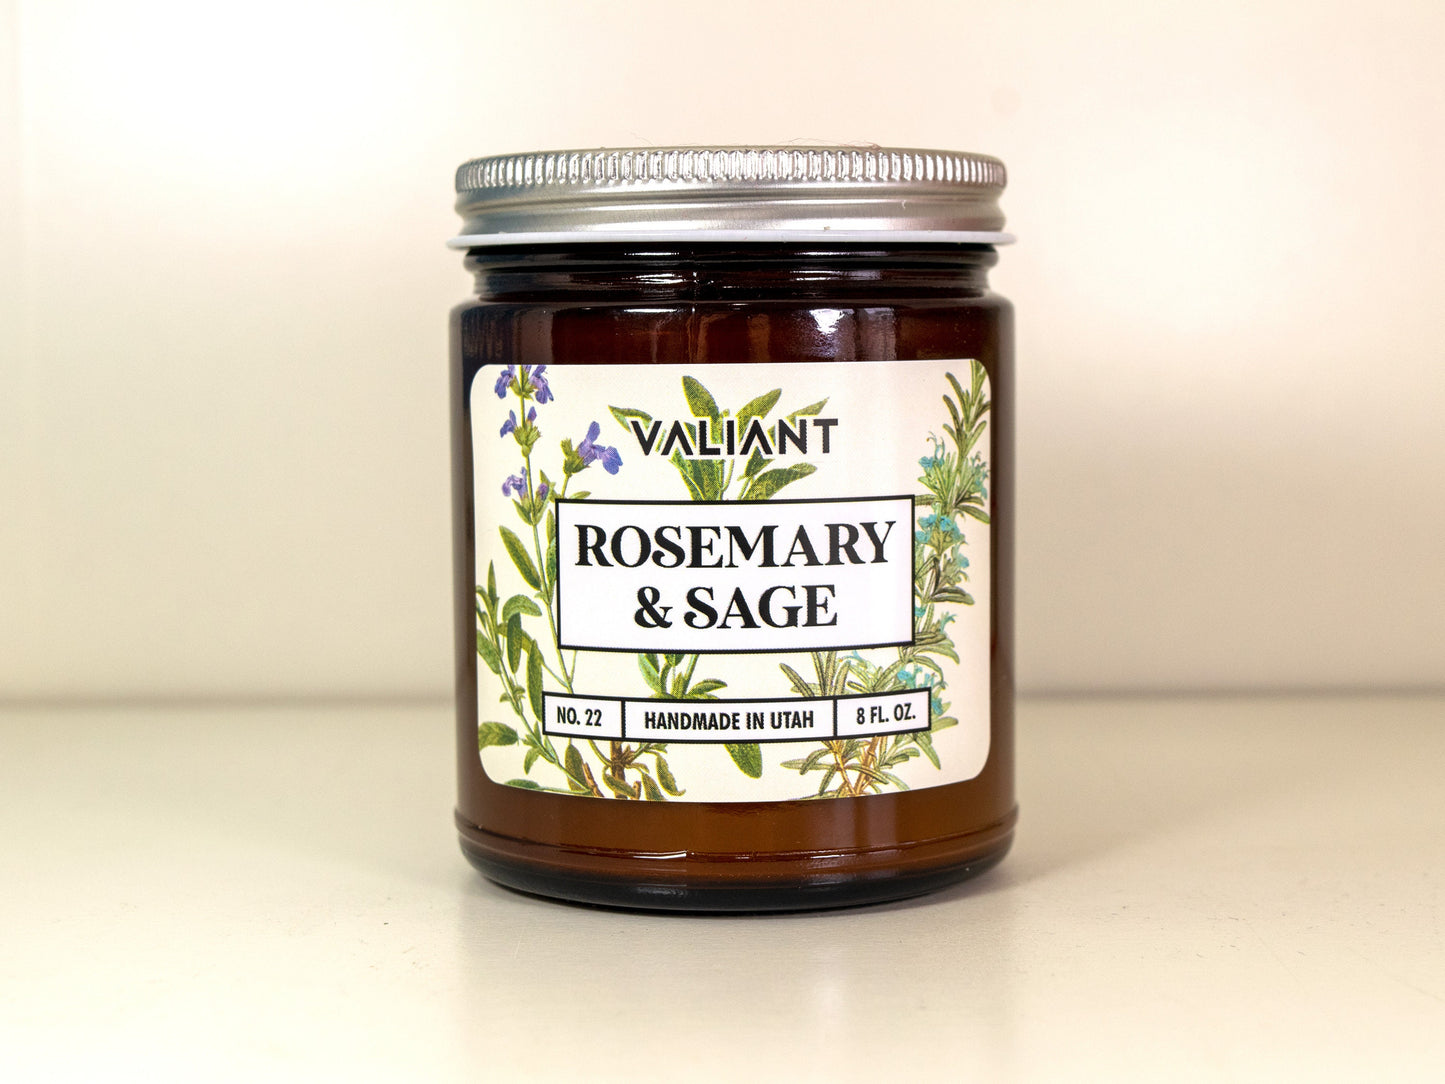 Rosemary & Sage Botanical Candle in Amber Glass